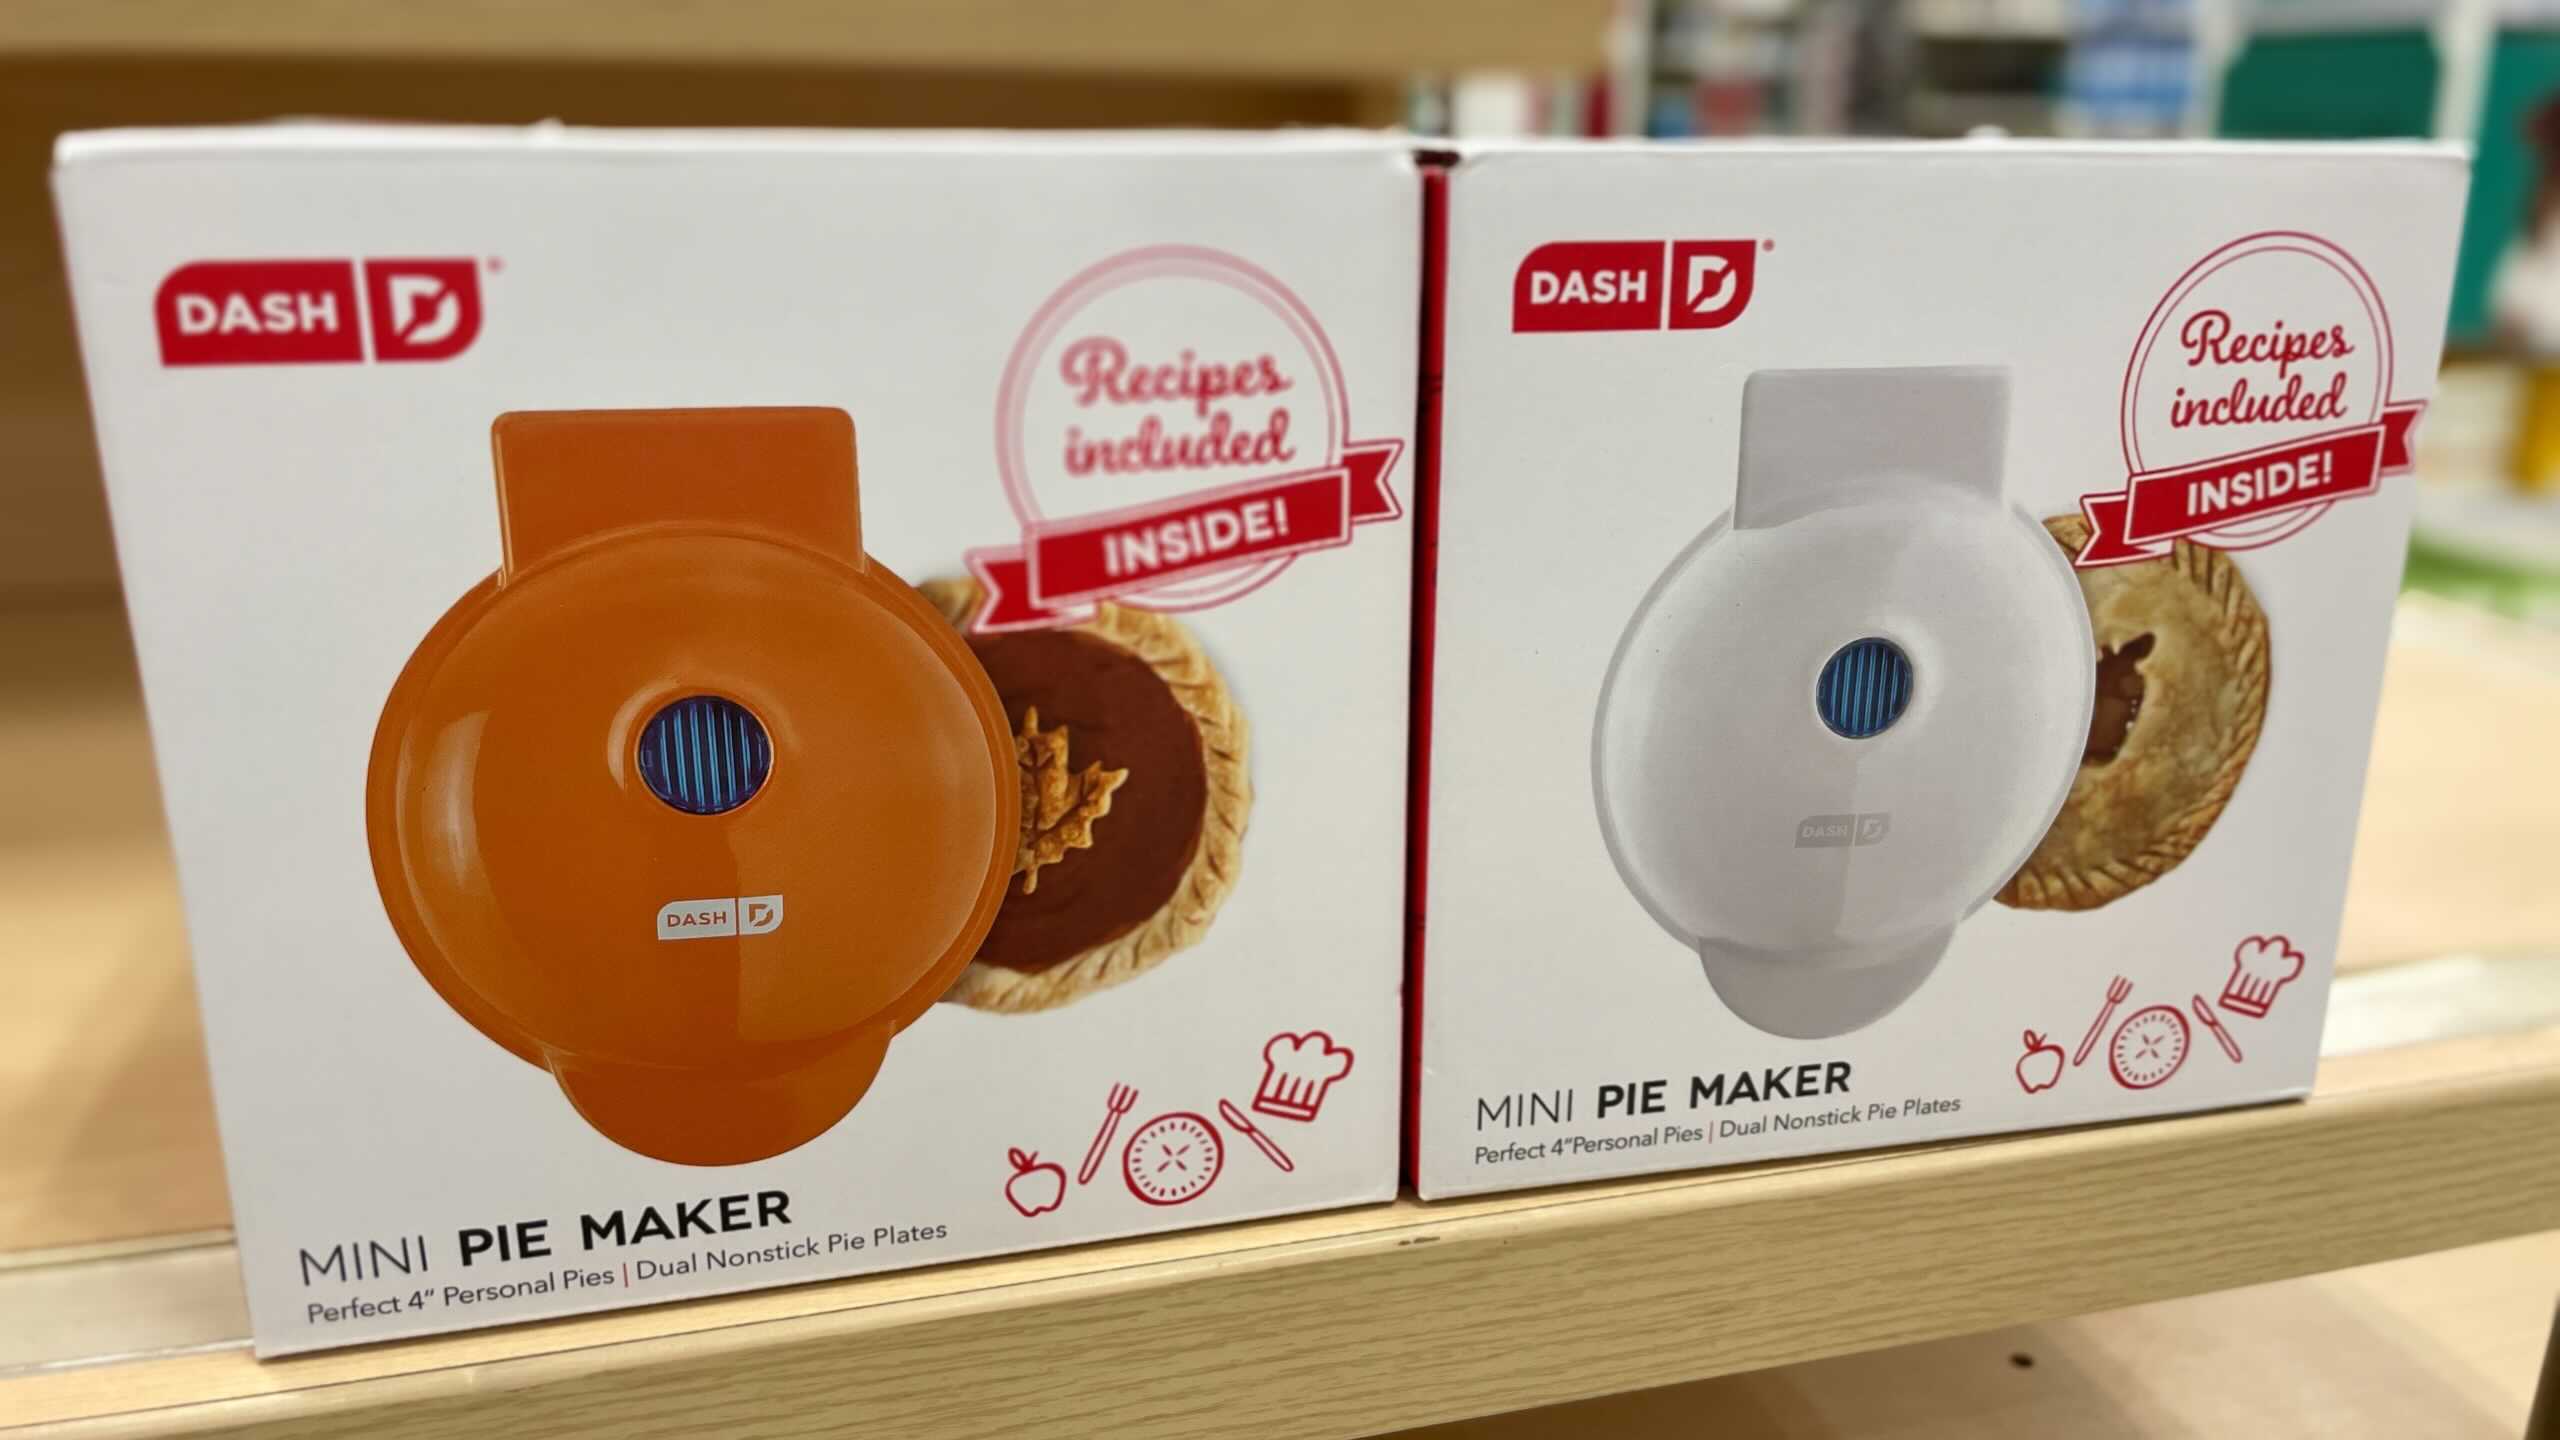 TARGET - DASH MINI PIE MAKERS FROM $14.99 - The Freebie Guy®